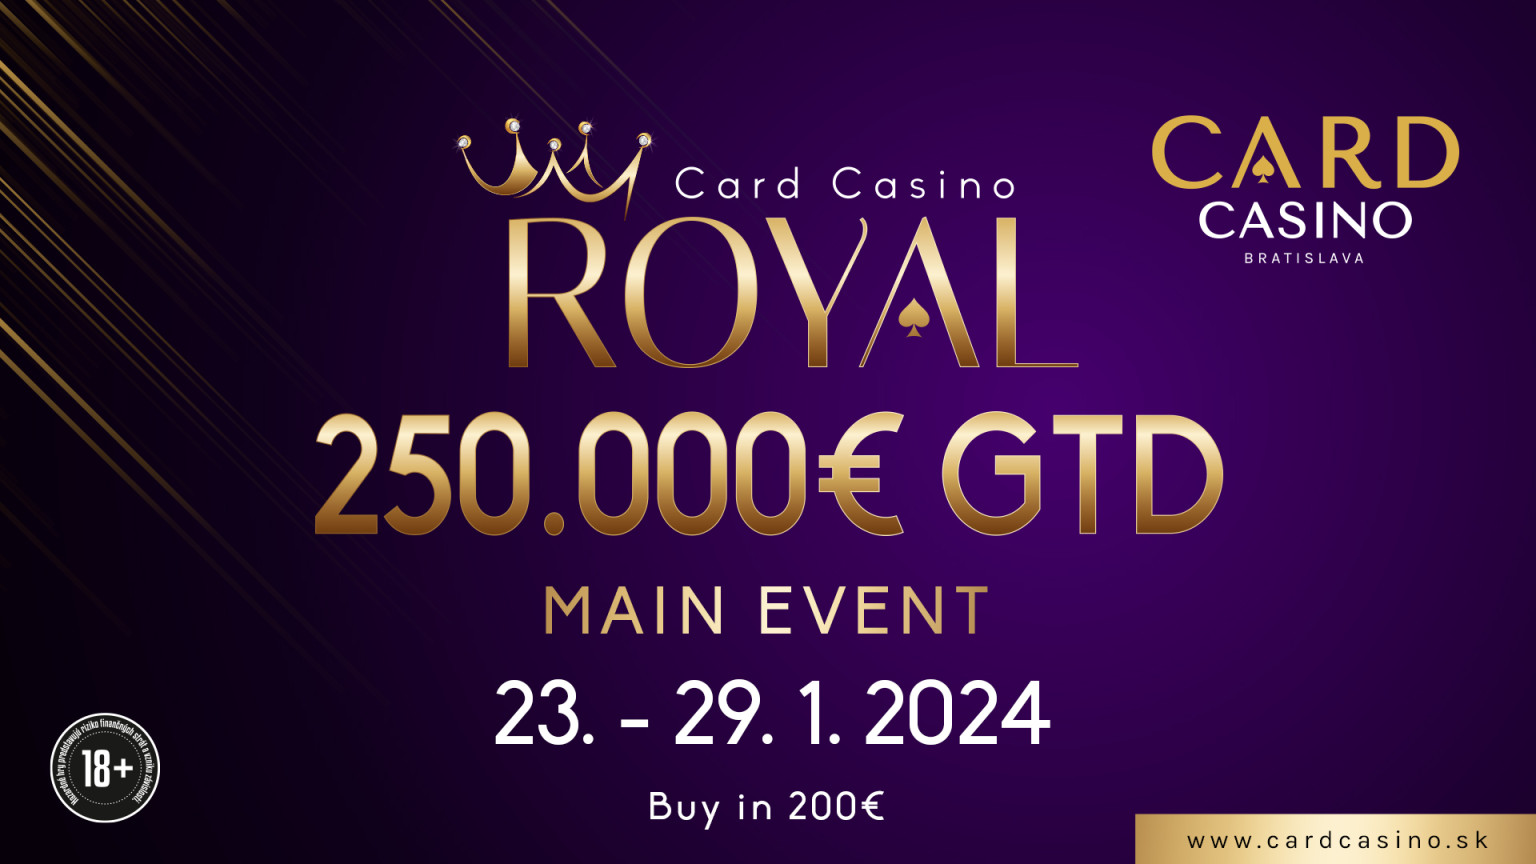 Royal start to 2024. €250,000 Royal takes place in January